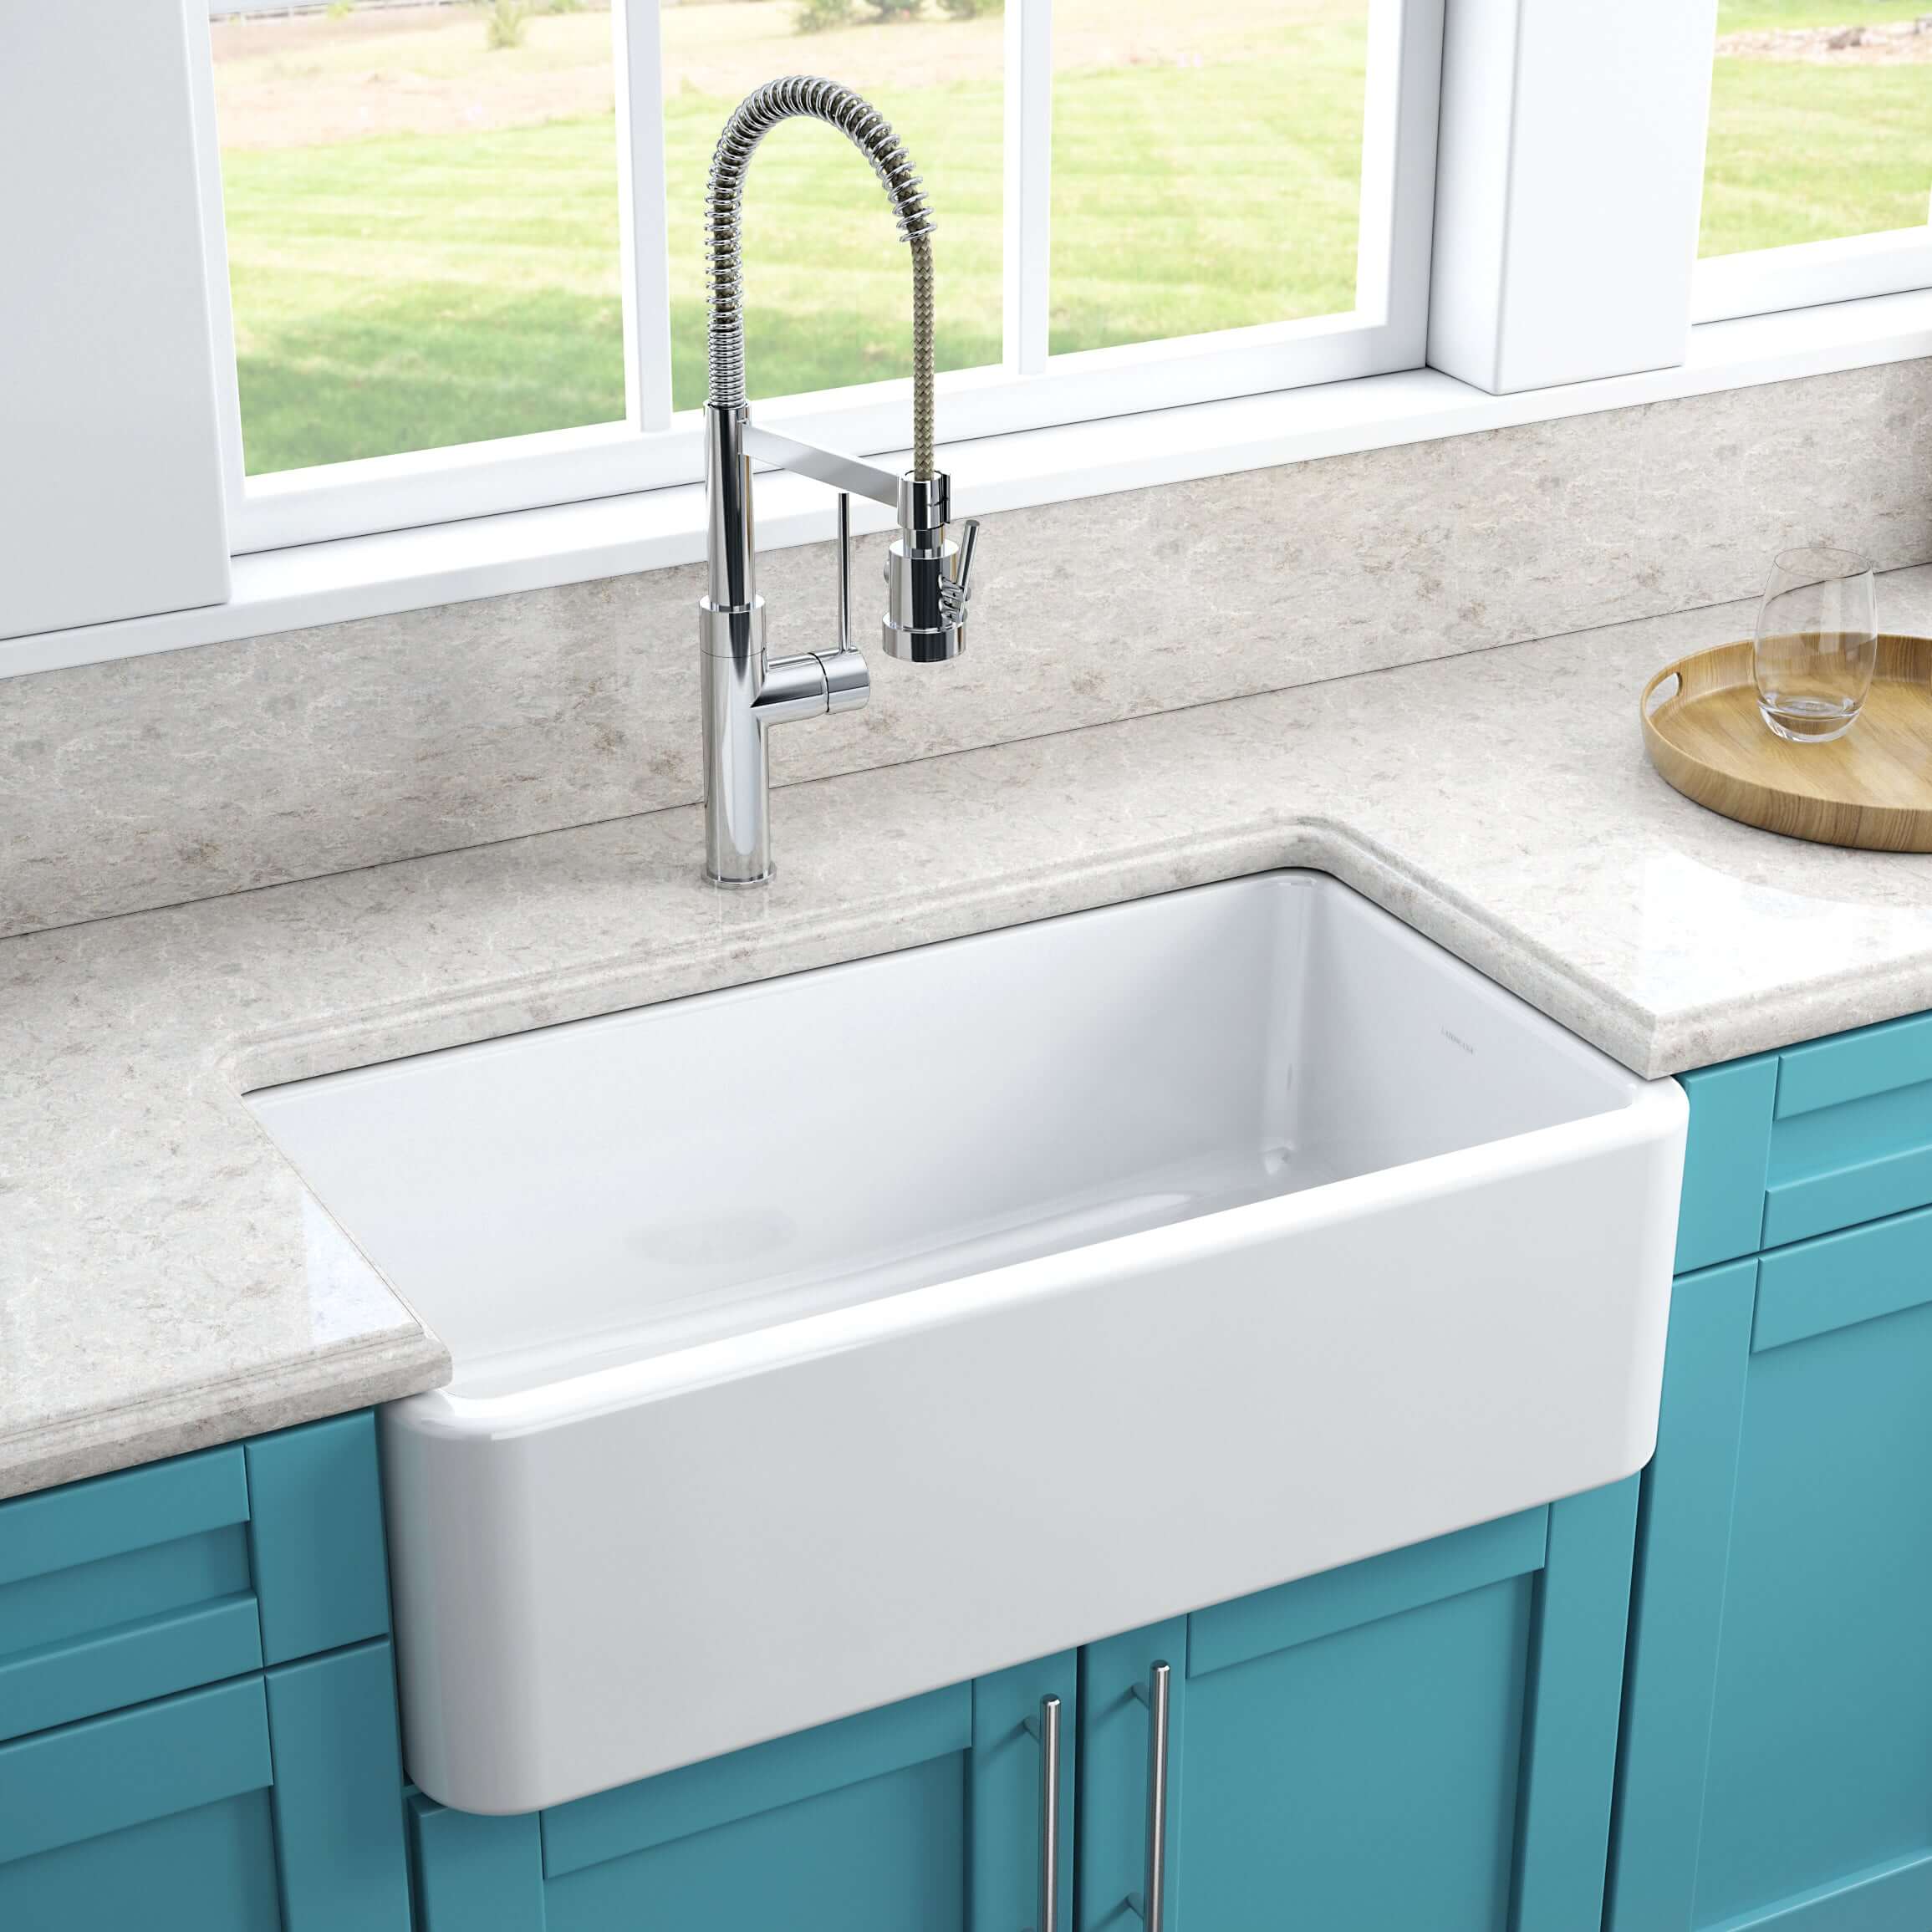 Buy Reversible Apron Front Fireclay Kitchen Sink